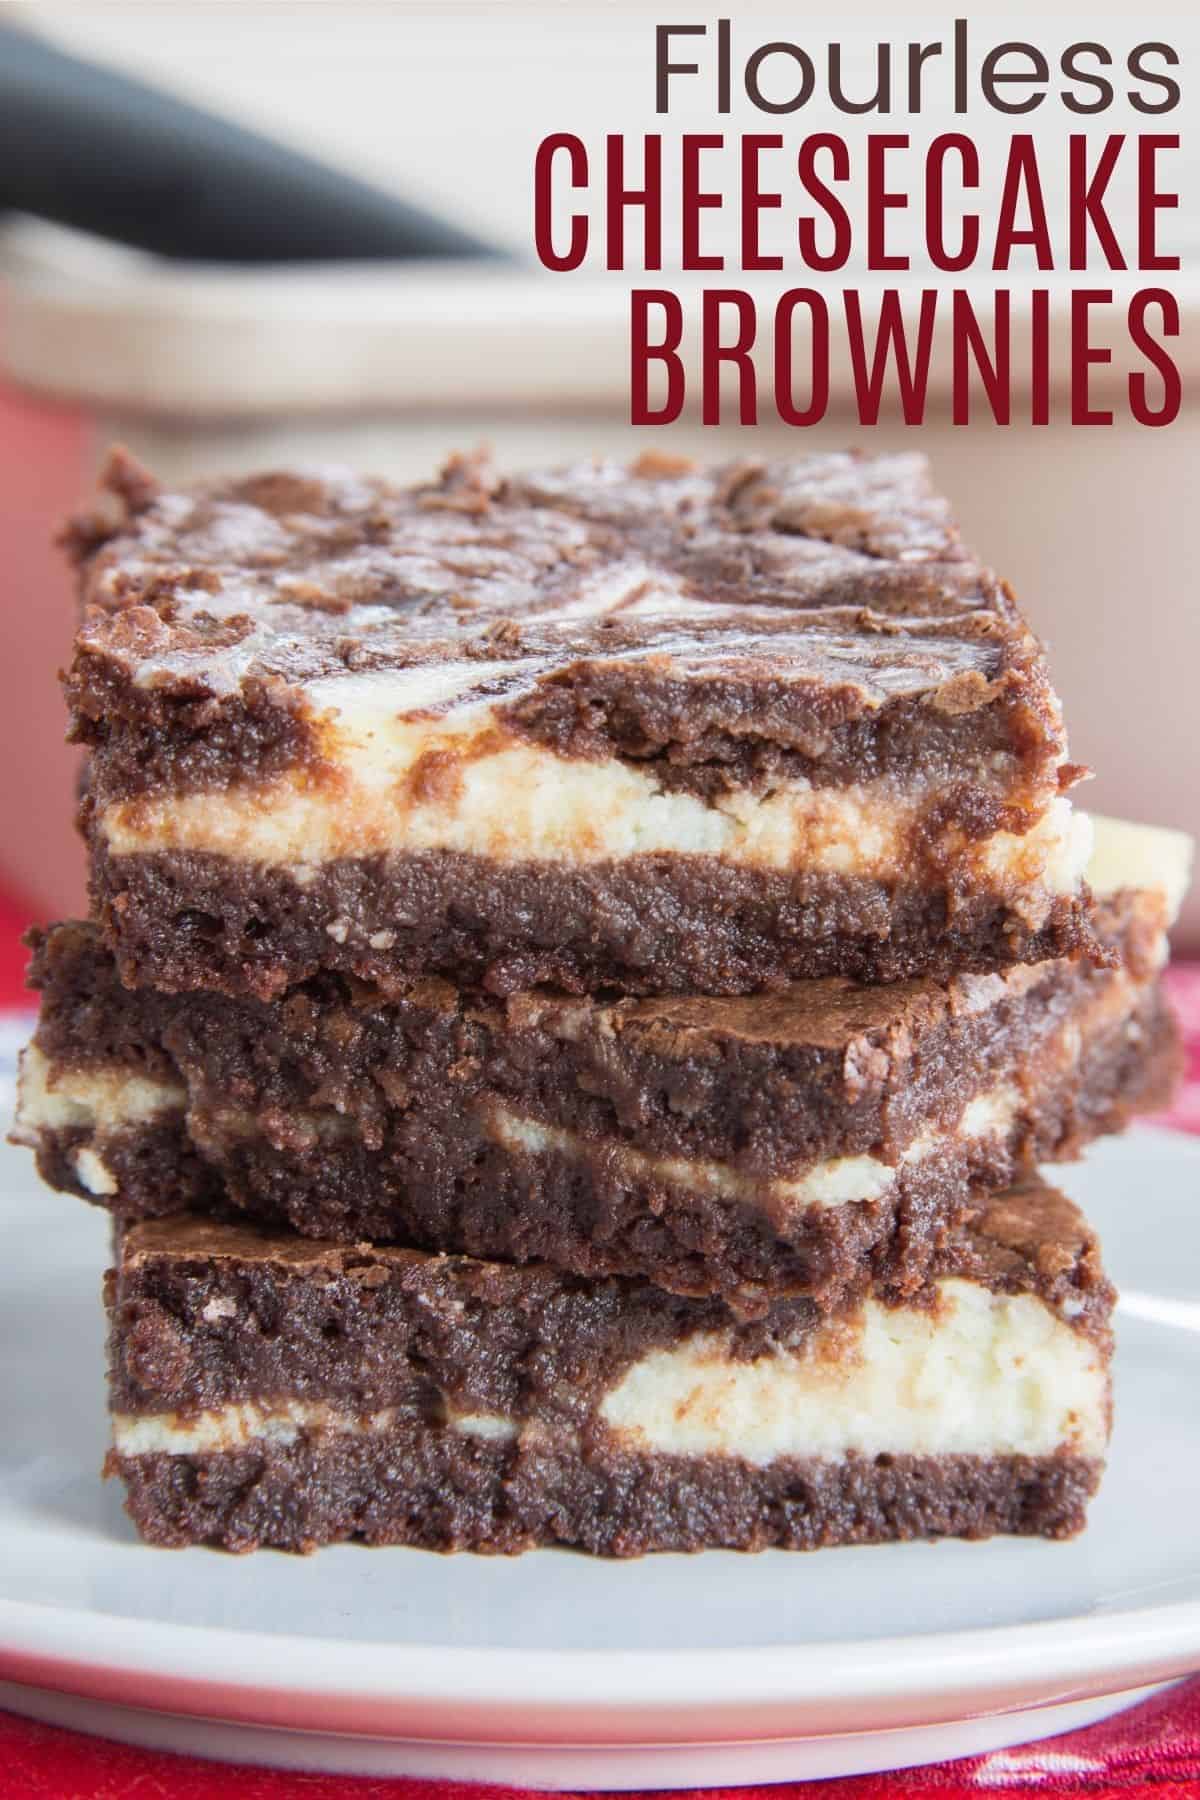 Three cheesecake brownies on a plate